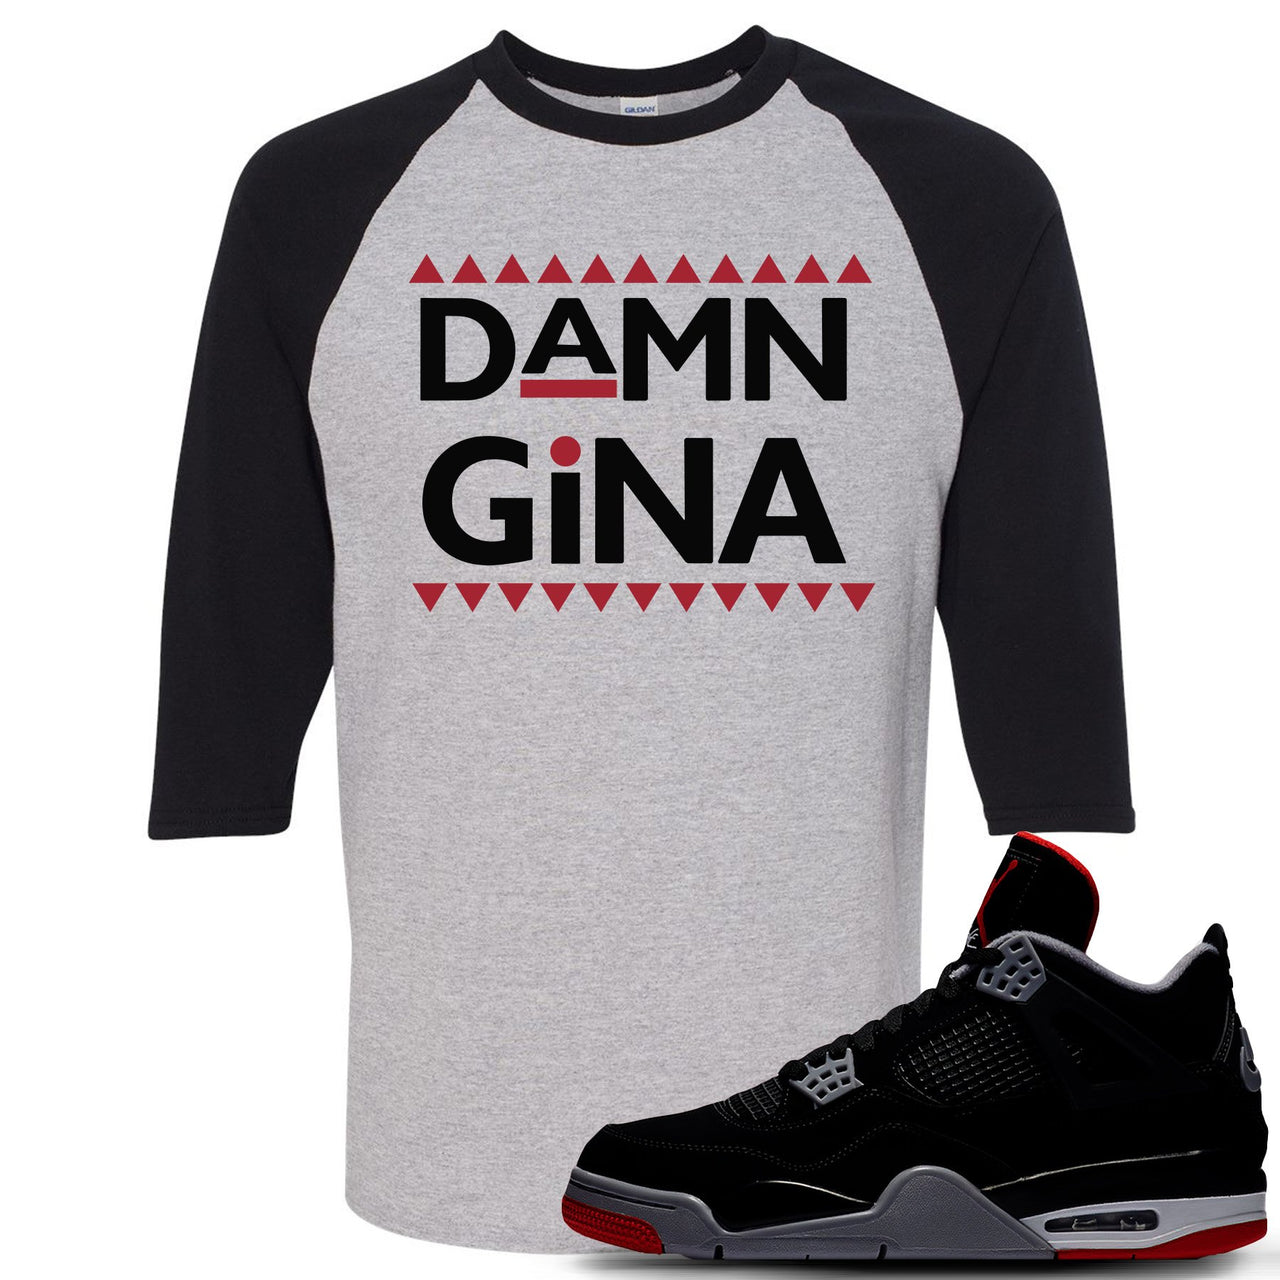 This grey and black t-shirt will match great with your Air Jordan 4 Bred shoes